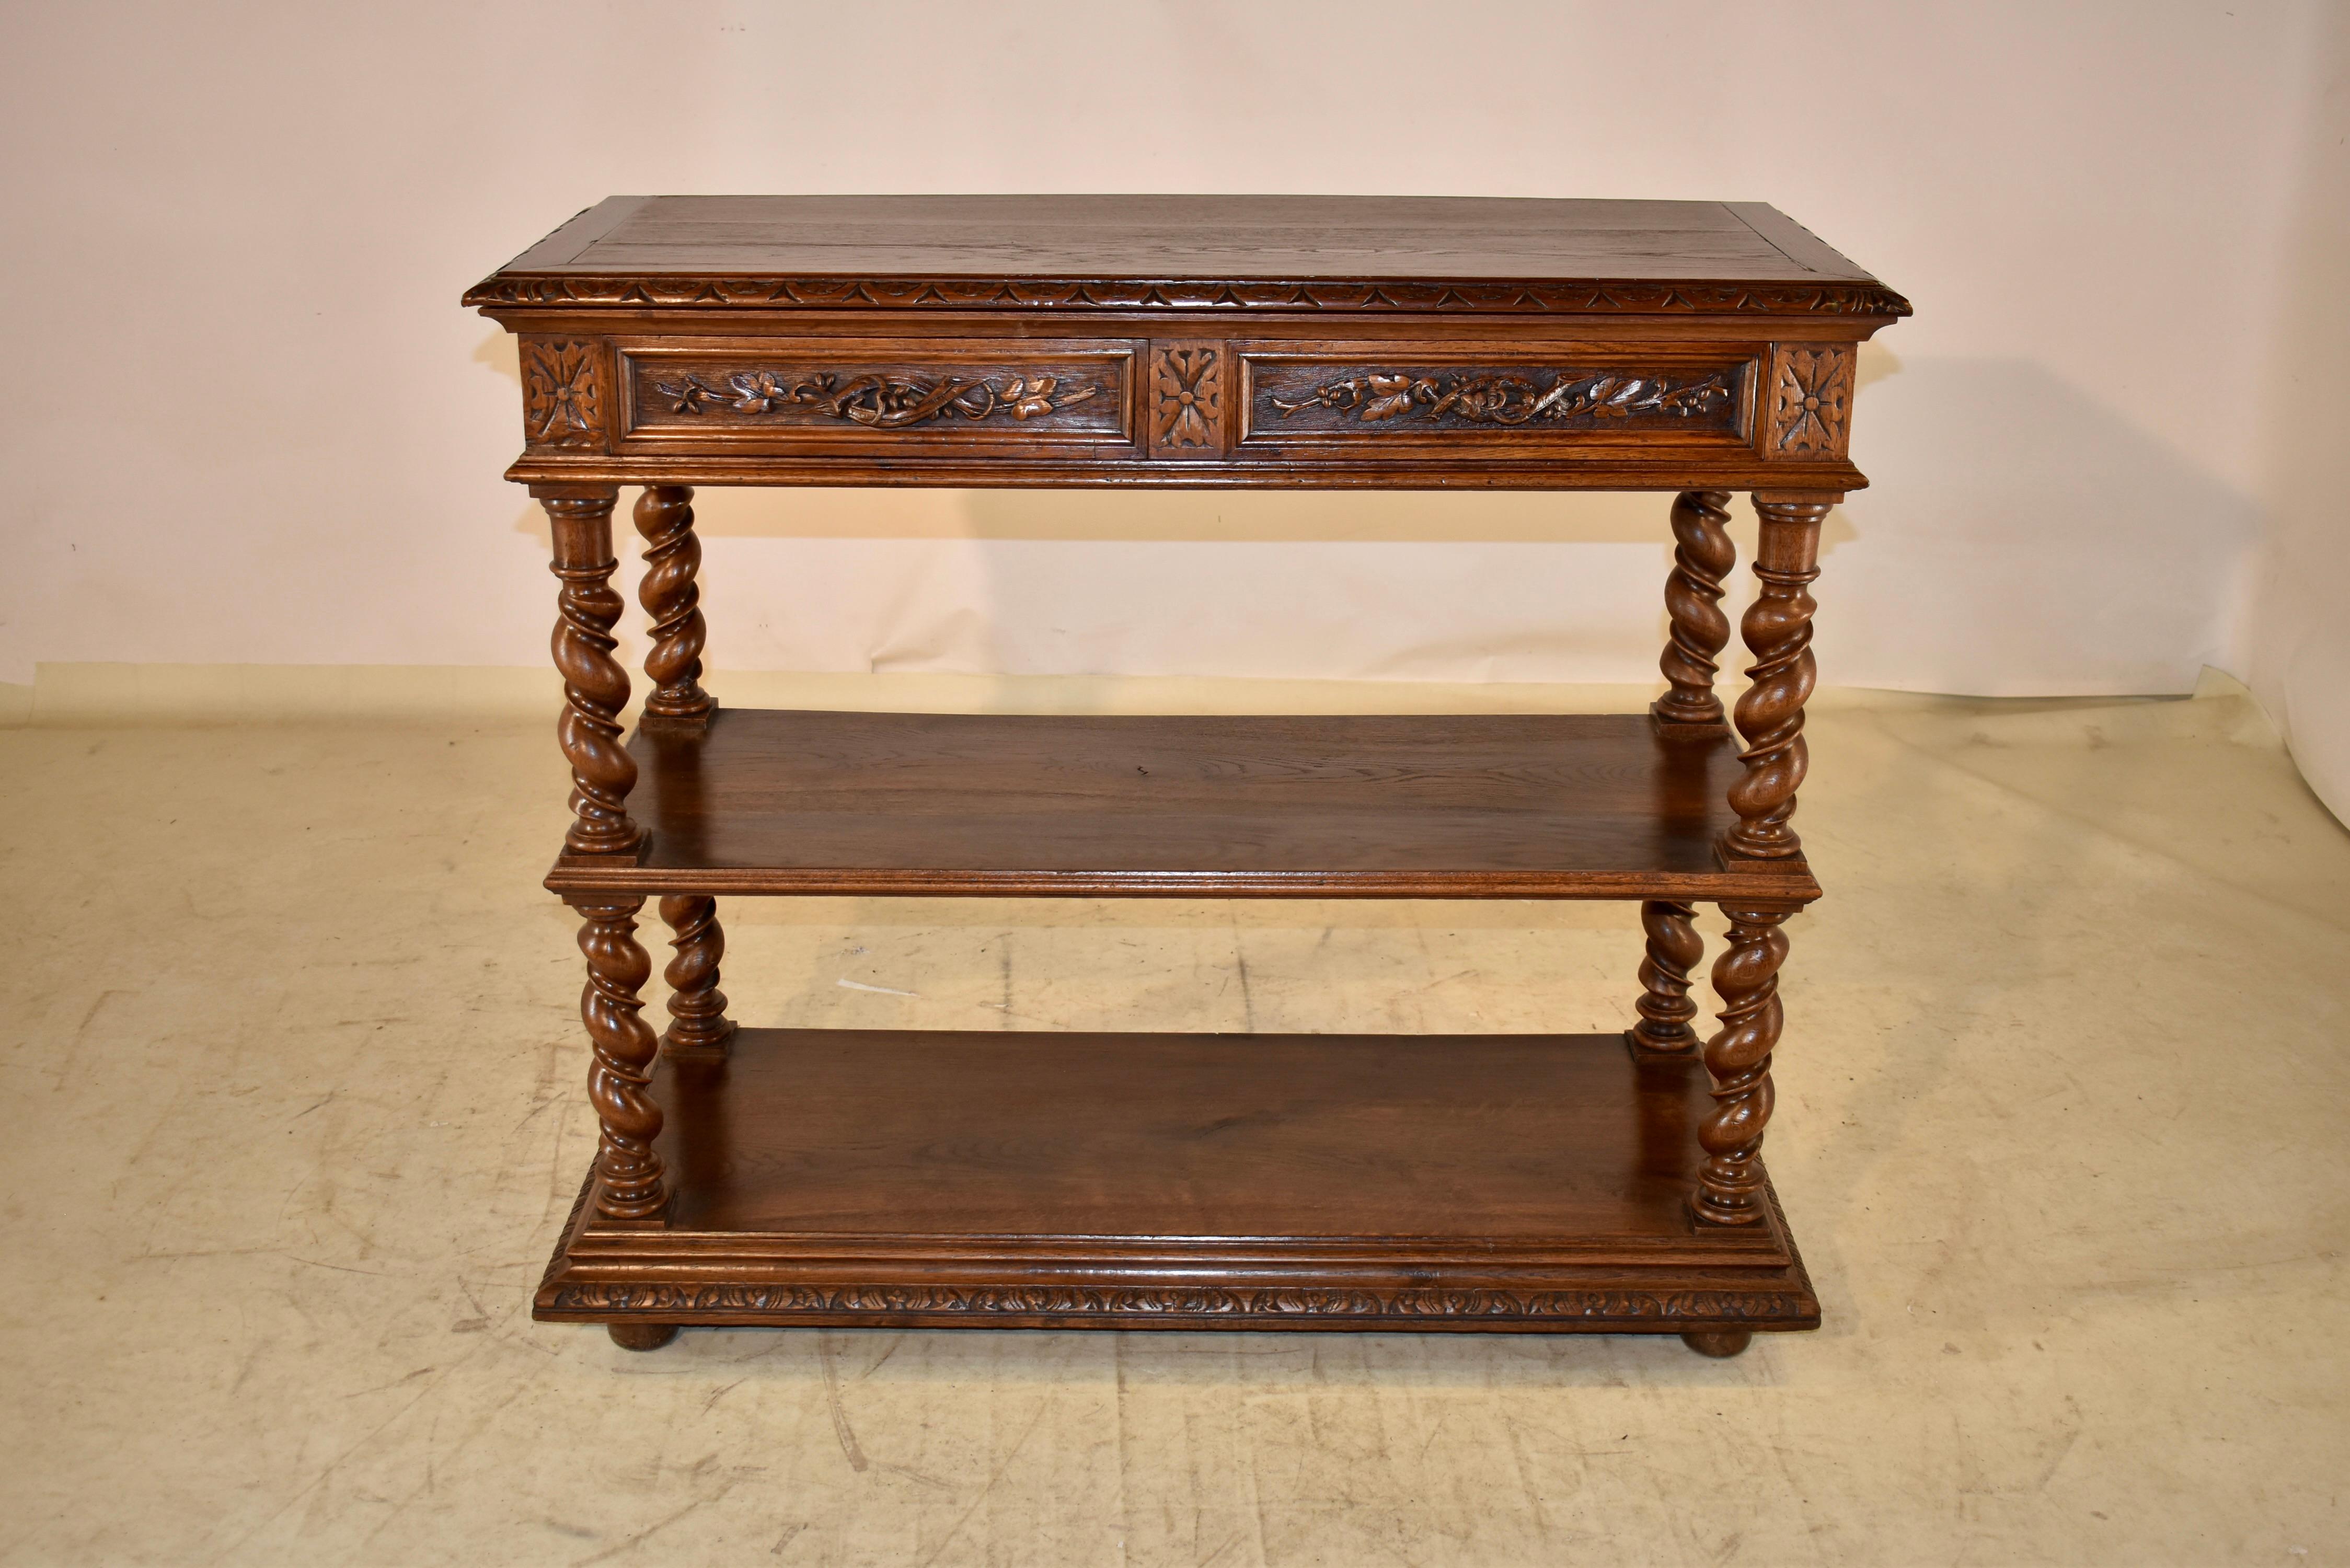 19th century oak dessert buffet from France.  The top is banded and has a beveled and hand carved decorated edge.  The top then lifts to reveal a marble serving surface, which is held up by a bracket.  The top is over hand carved paneled sides, and